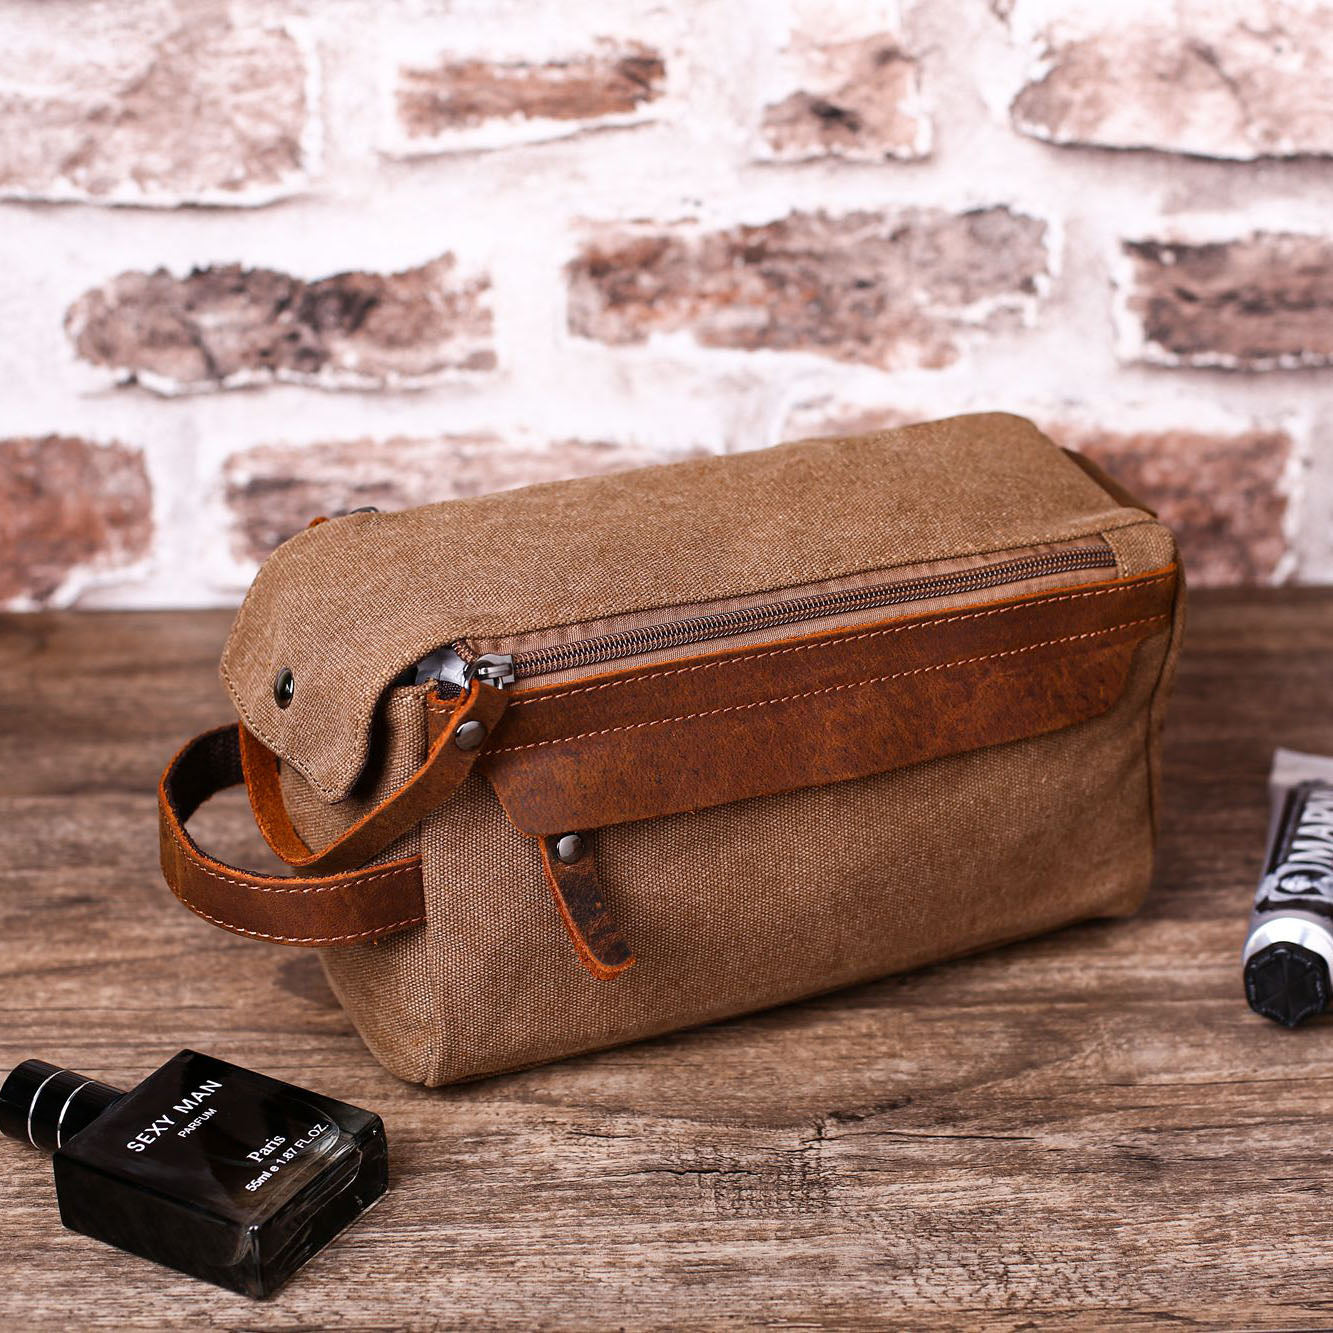  10 Premium Leather Toiletry Travel Pouch With Waterproof  Lining  King-Size Handcrafted Vintage Dopp - Kit ~ Gift for Father's Day  By Aaron Leather Goods (Copper) : Beauty & Personal Care